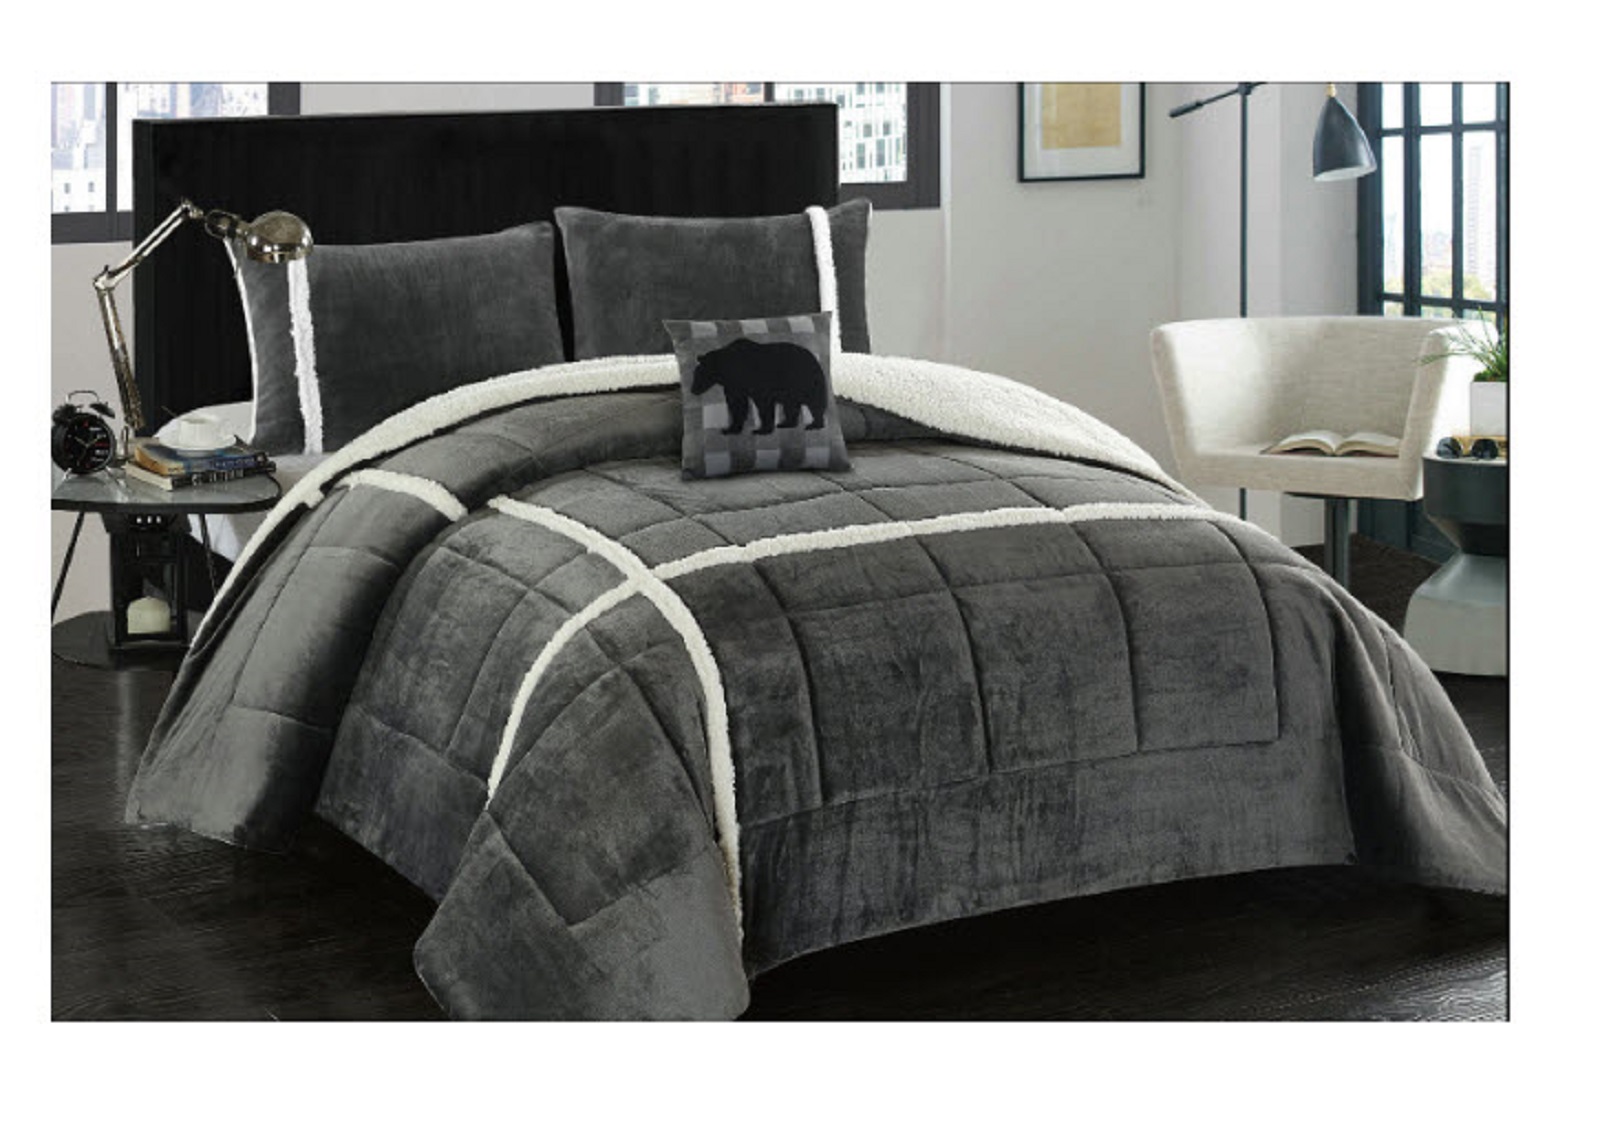 4pc. Sherpa Comforter Set - Solid Gray